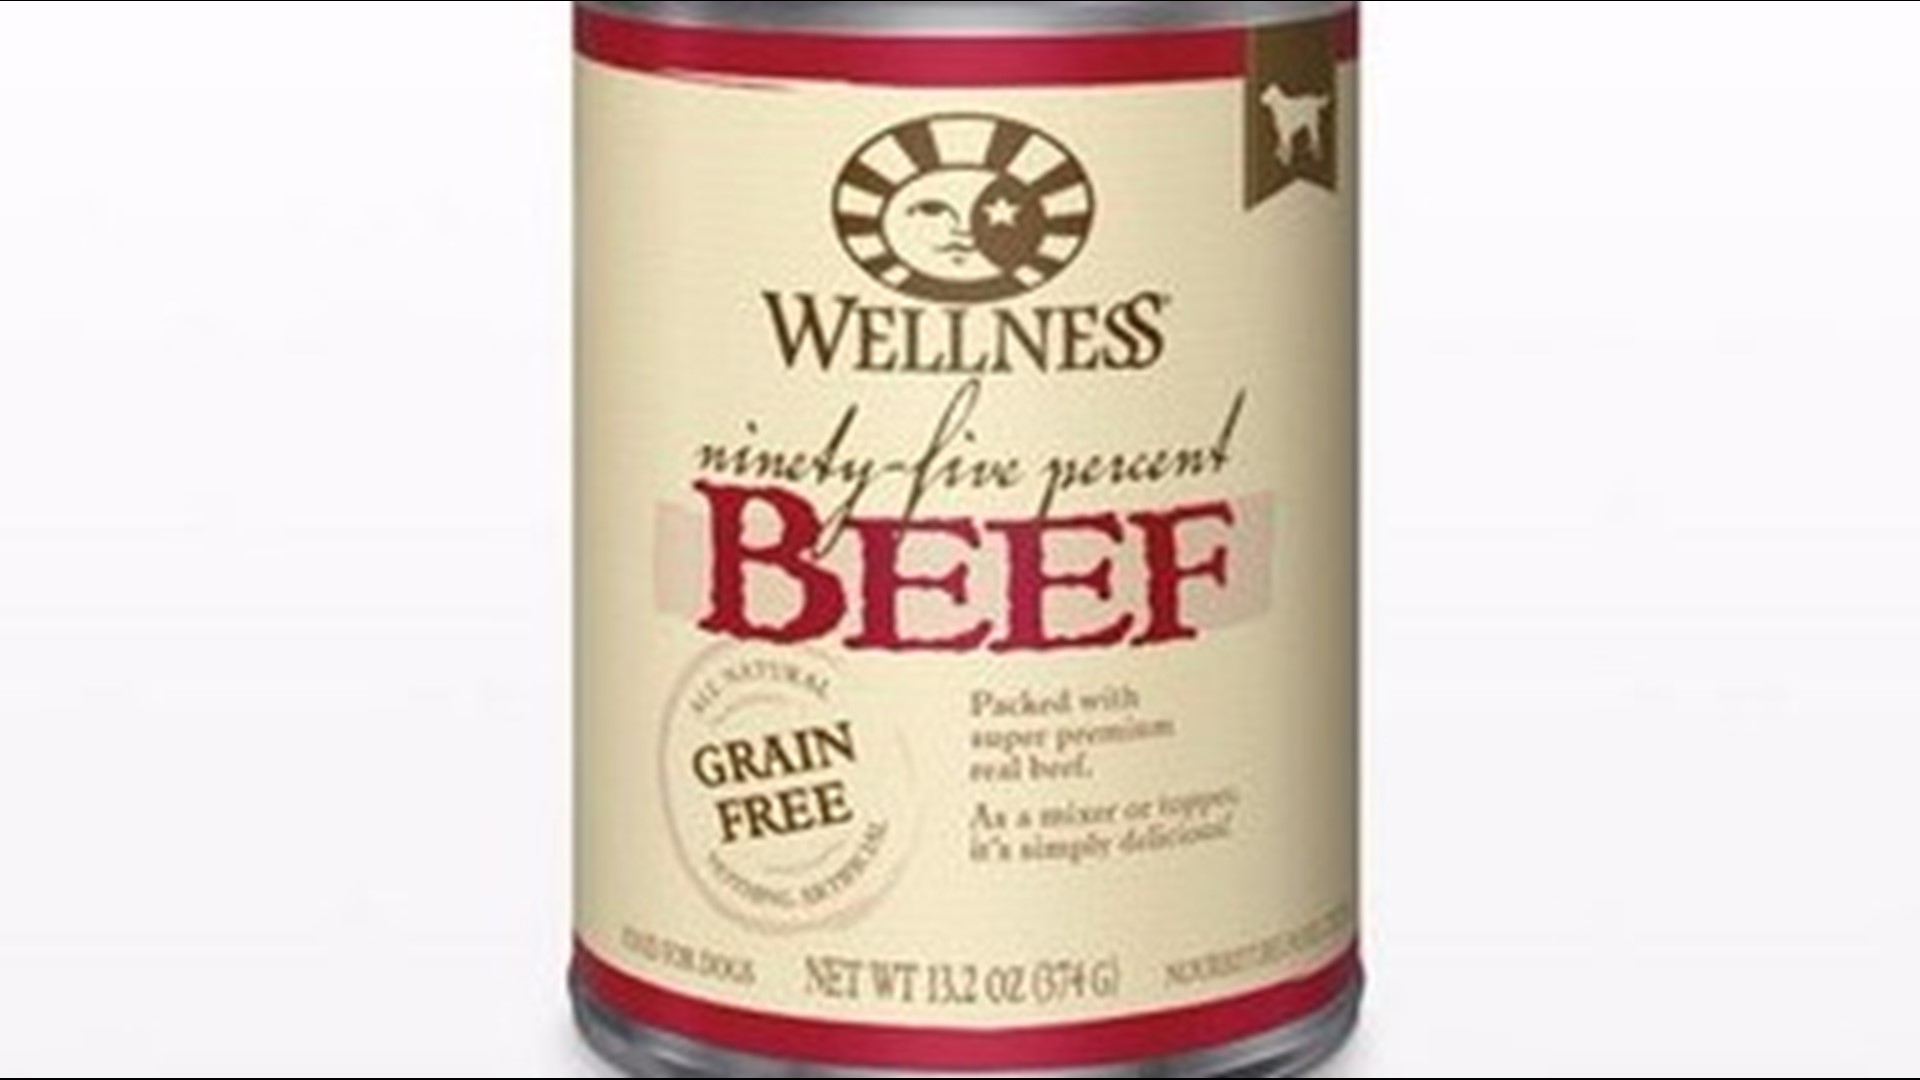 Wellness Dog Food issues voluntary recall on canned food | wltx.com